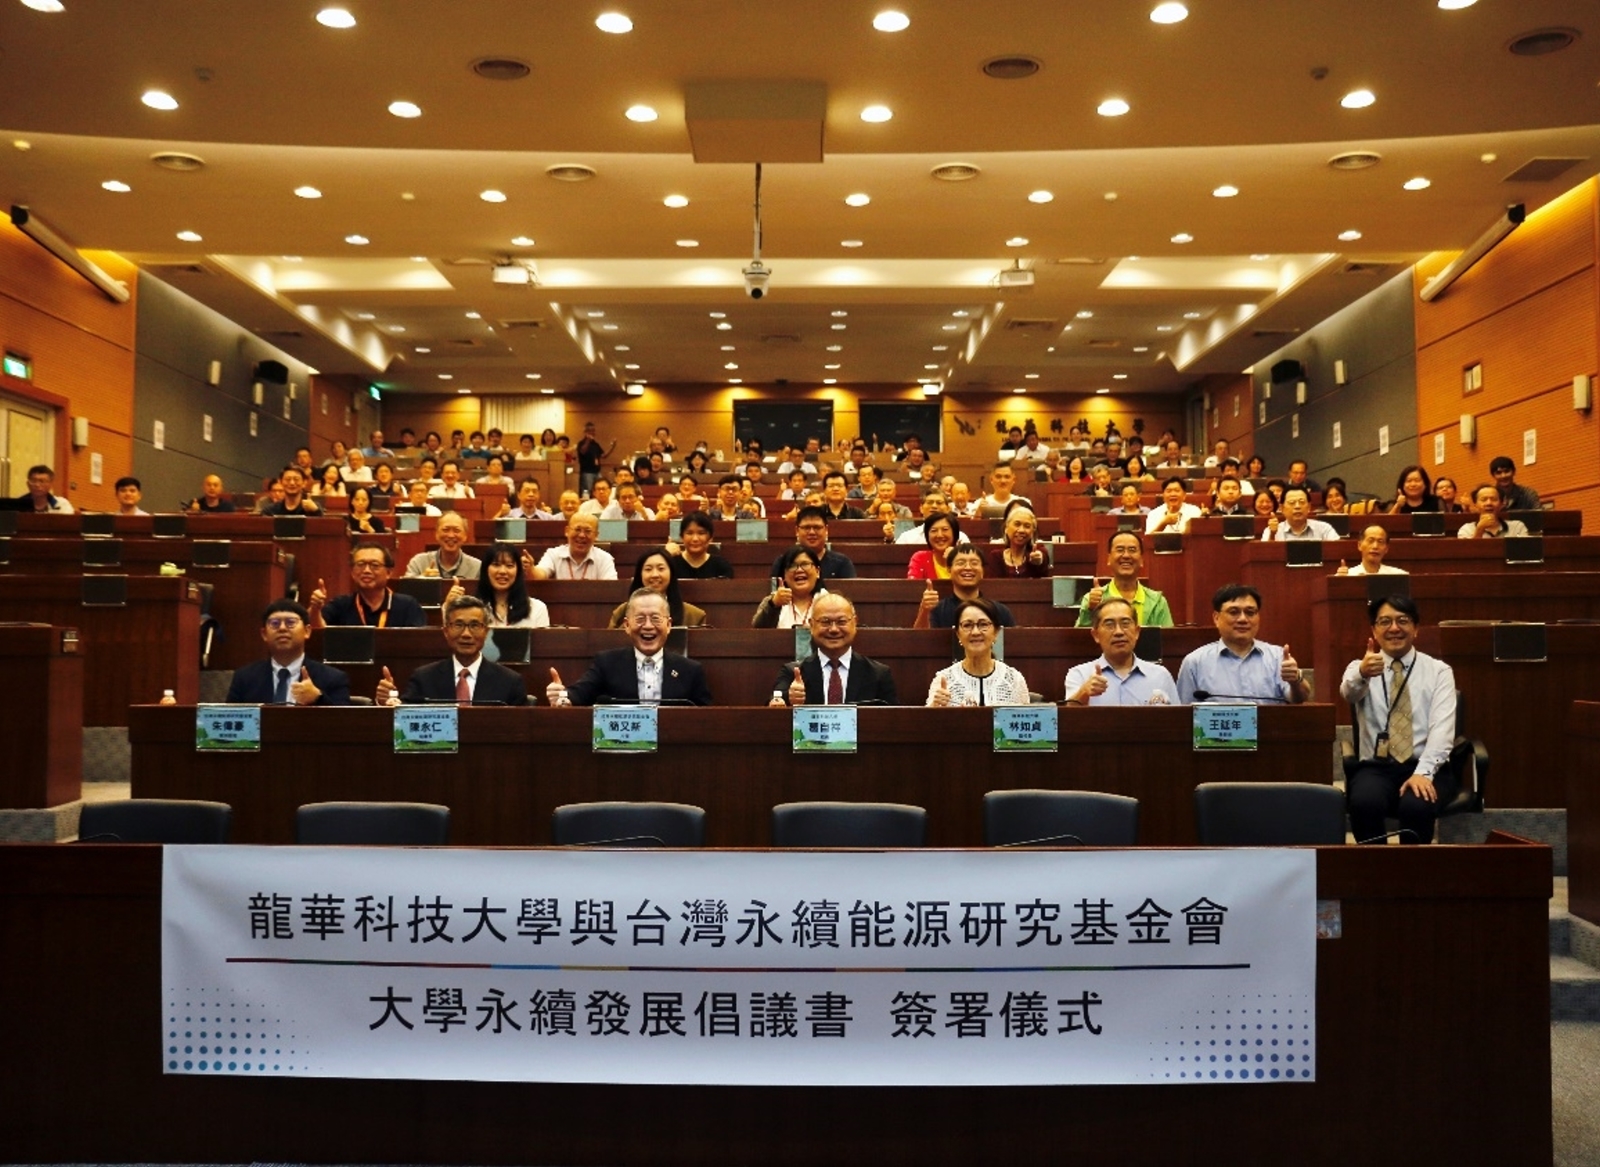 Lunghwa University and Taiwan Institute for Sustainable Energy have collaborated to achieve sustainable development through dialogue and shared understanding.